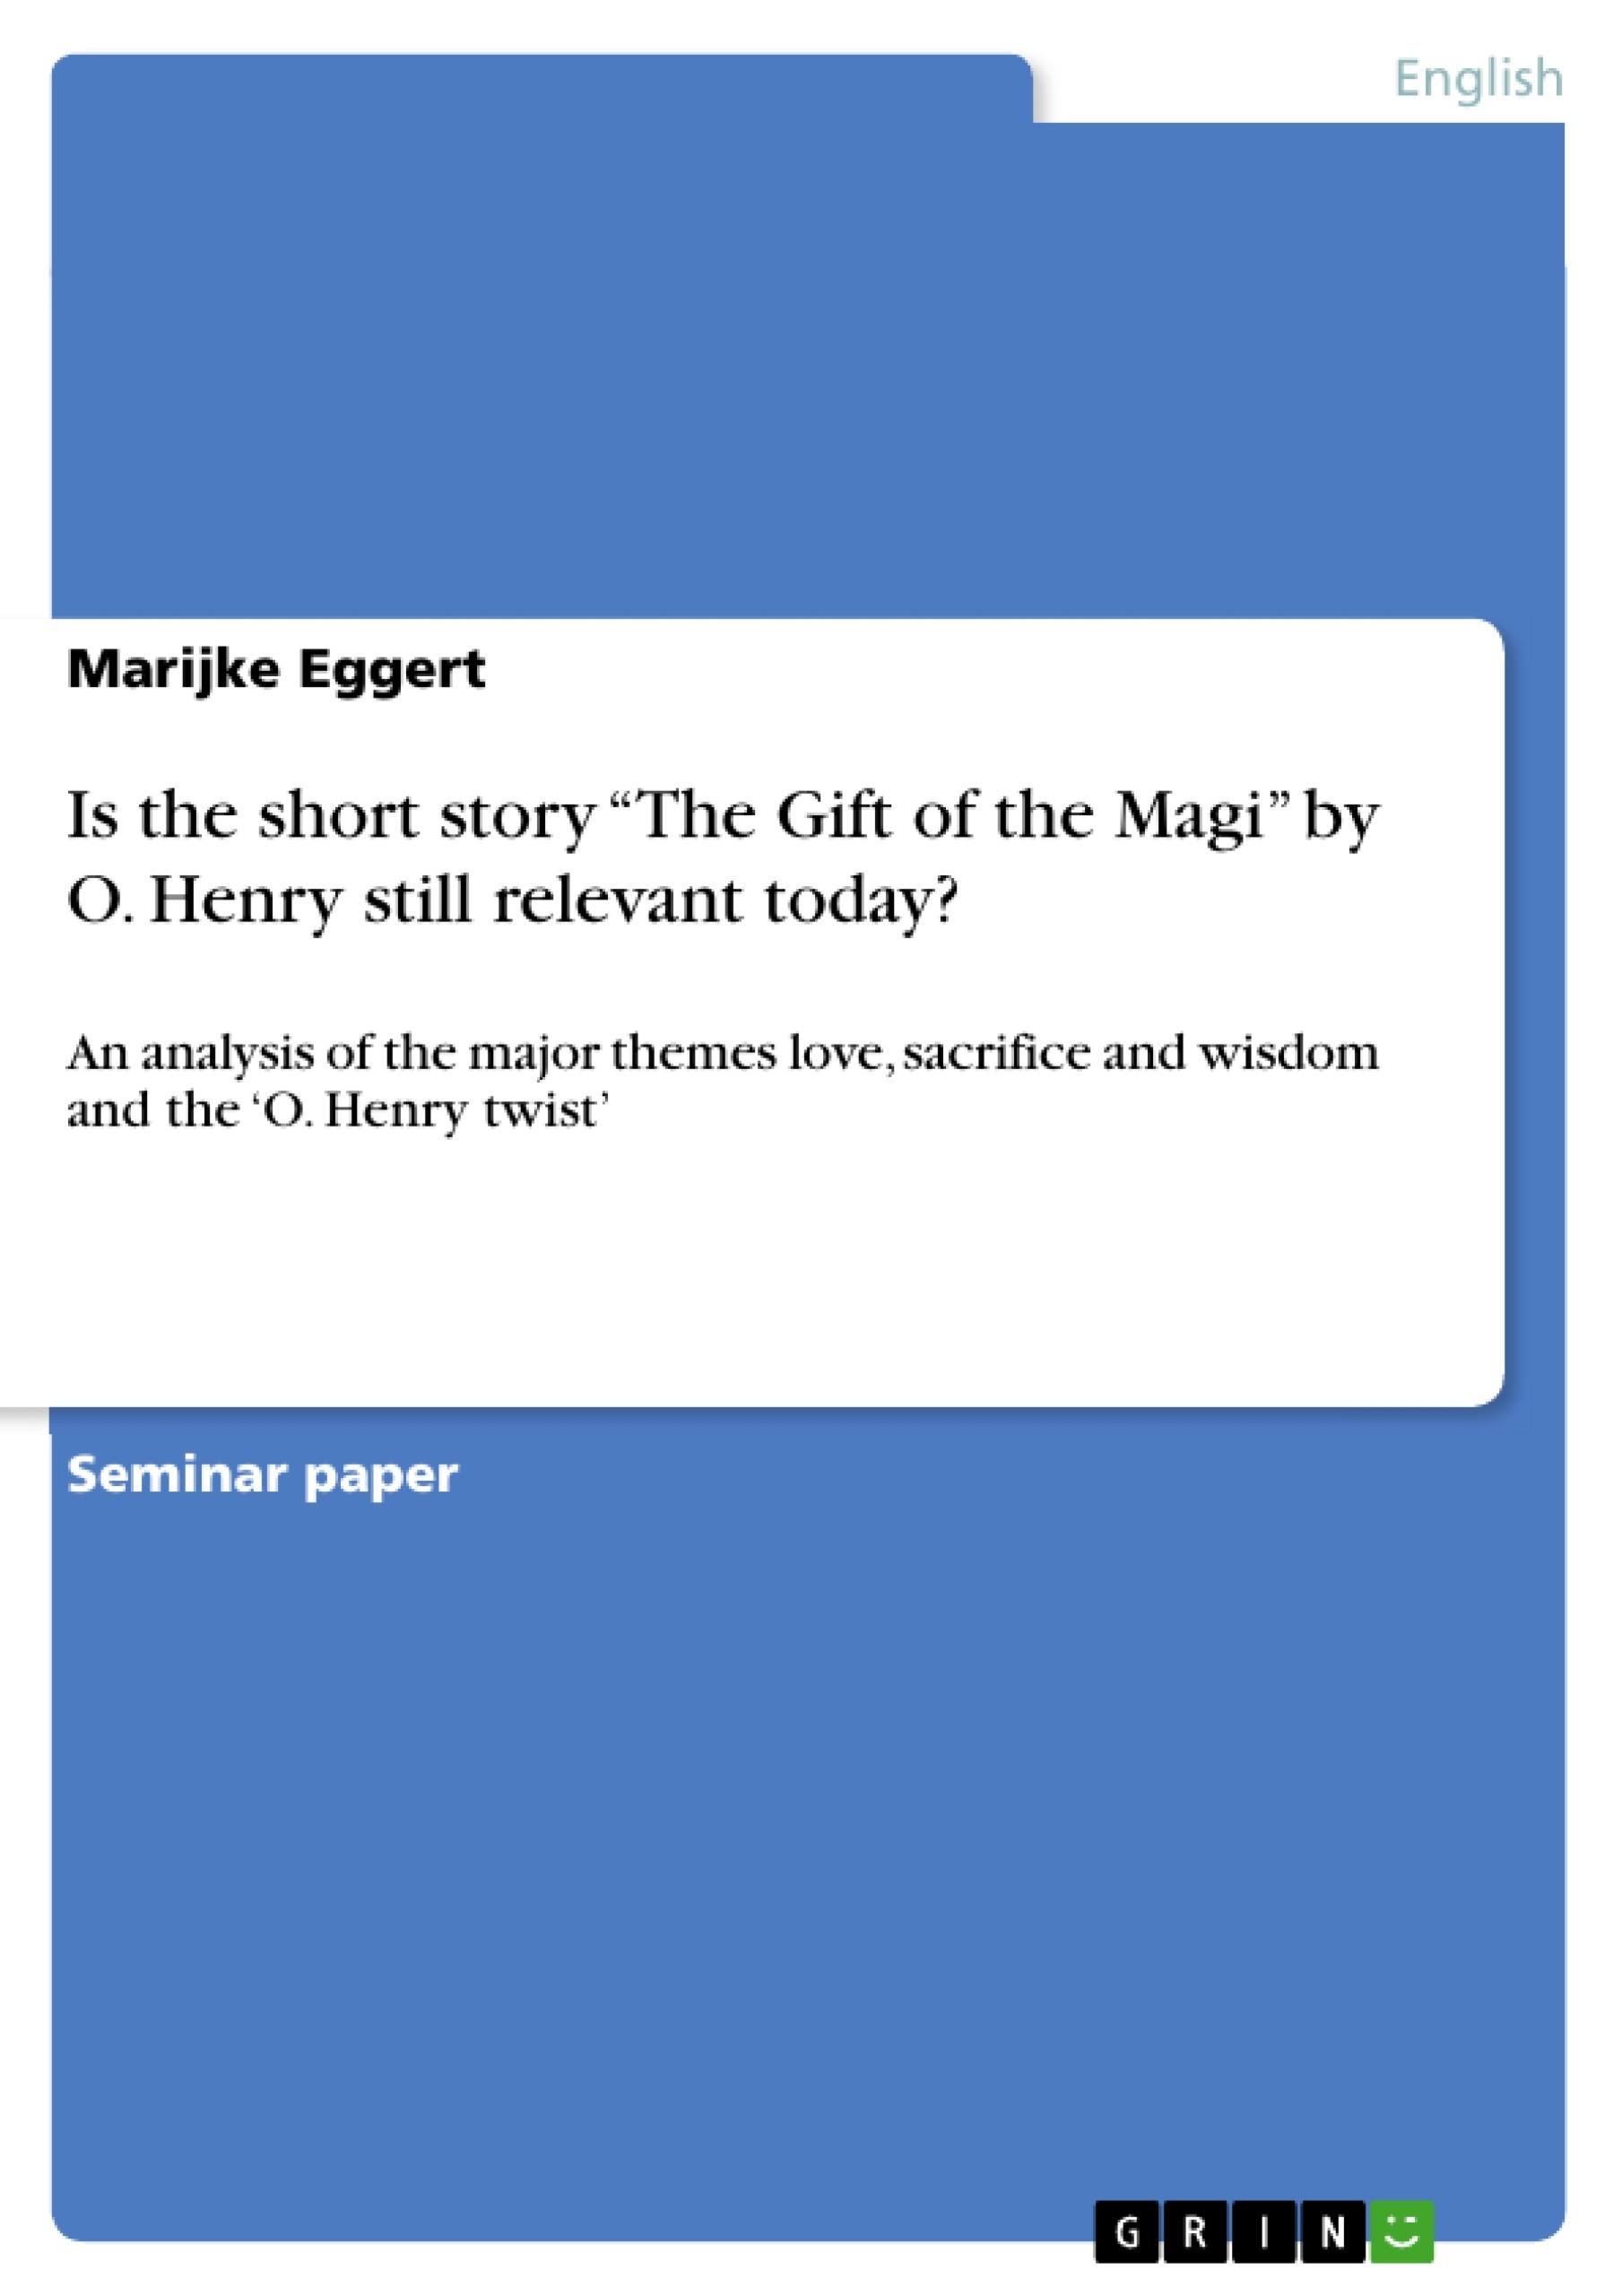 Title: Is the short story “The Gift of the Magi” by O. Henry still relevant today?